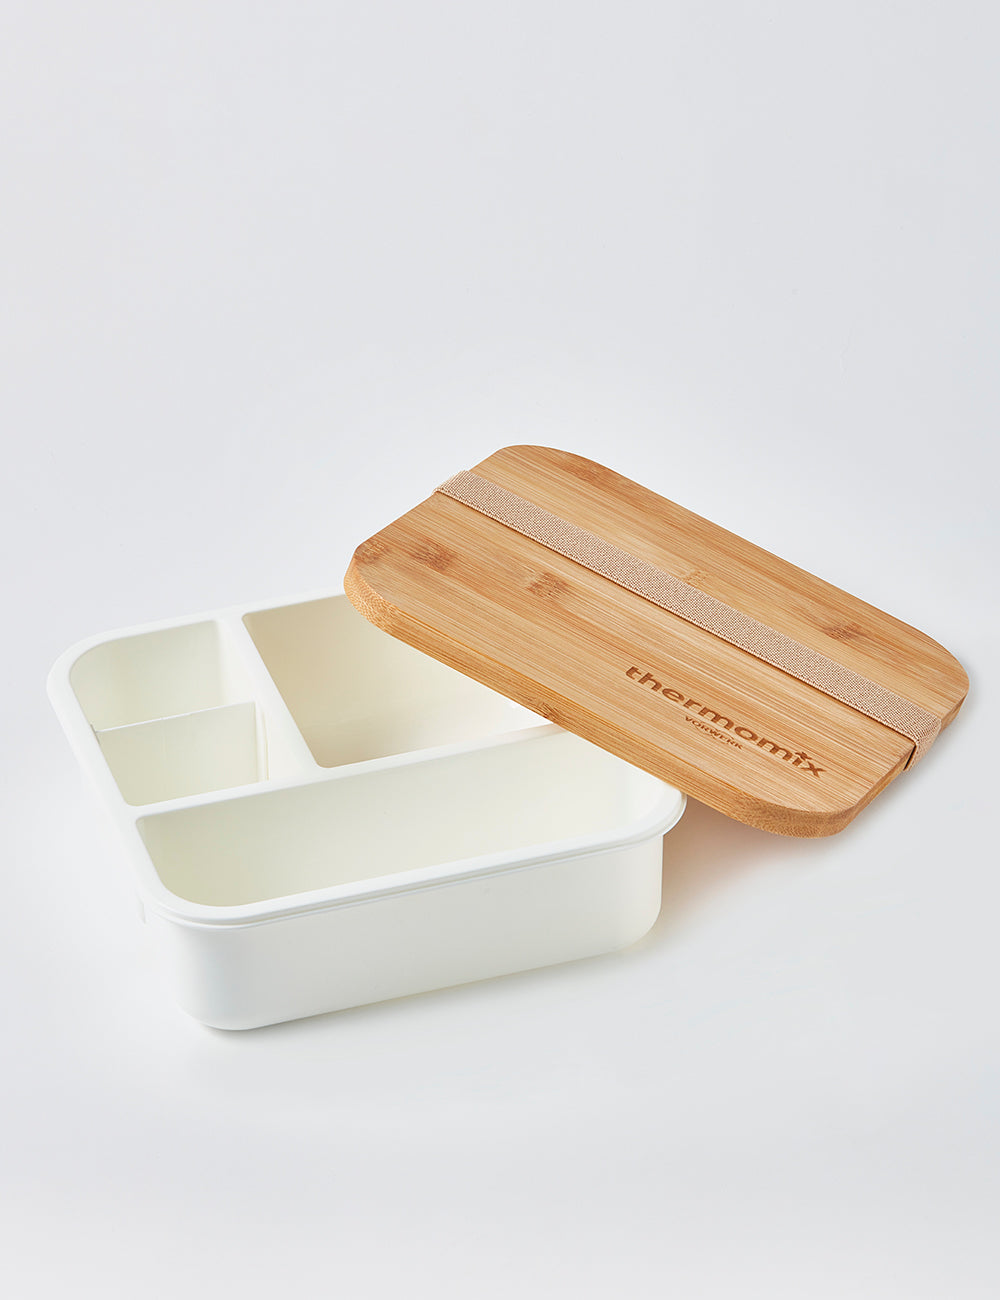 Thermomix® Bento Box: The Perfect On-the-Go Lunch Solution